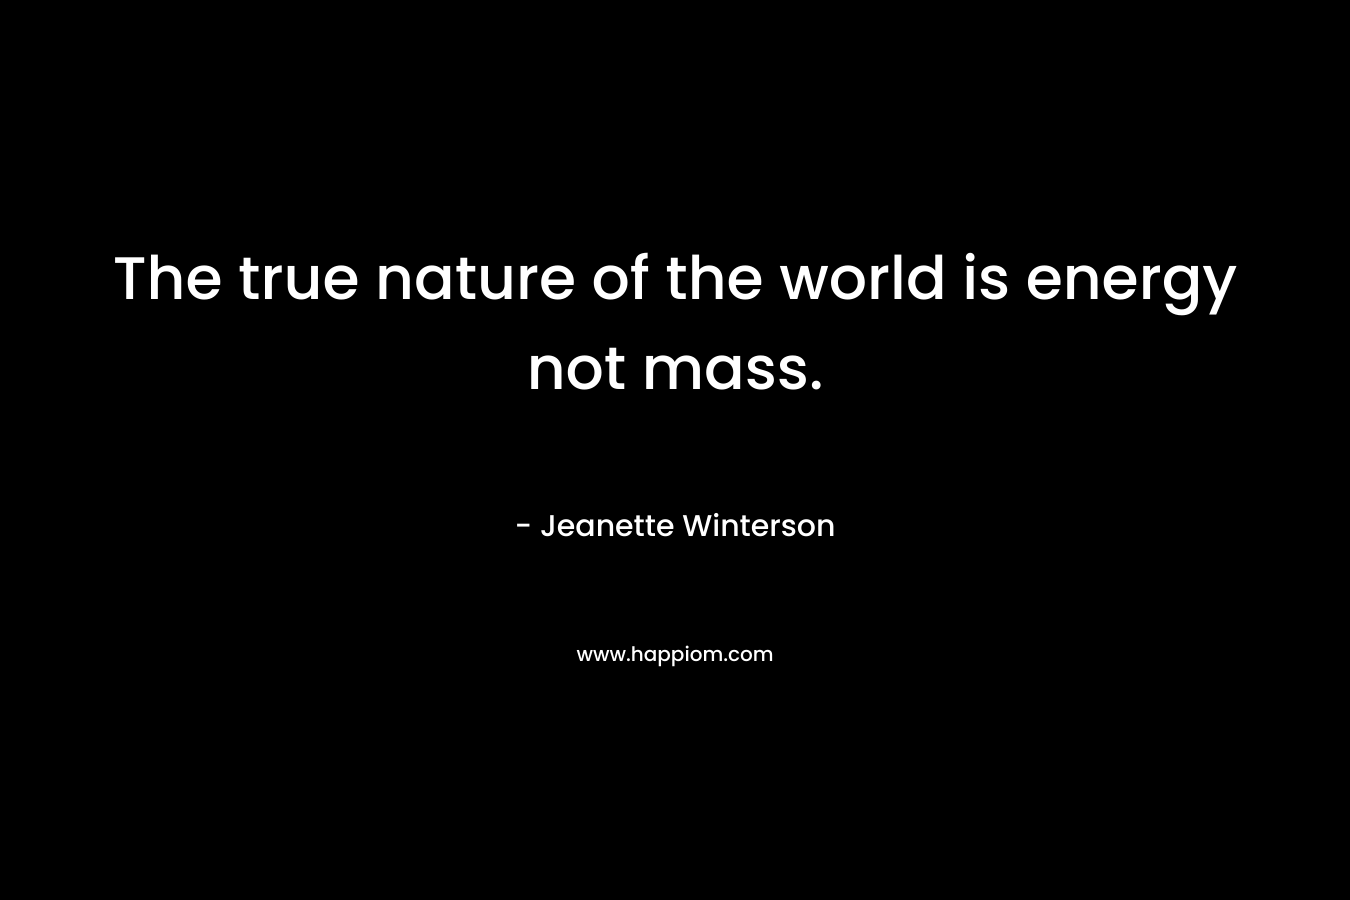 The true nature of the world is energy not mass.